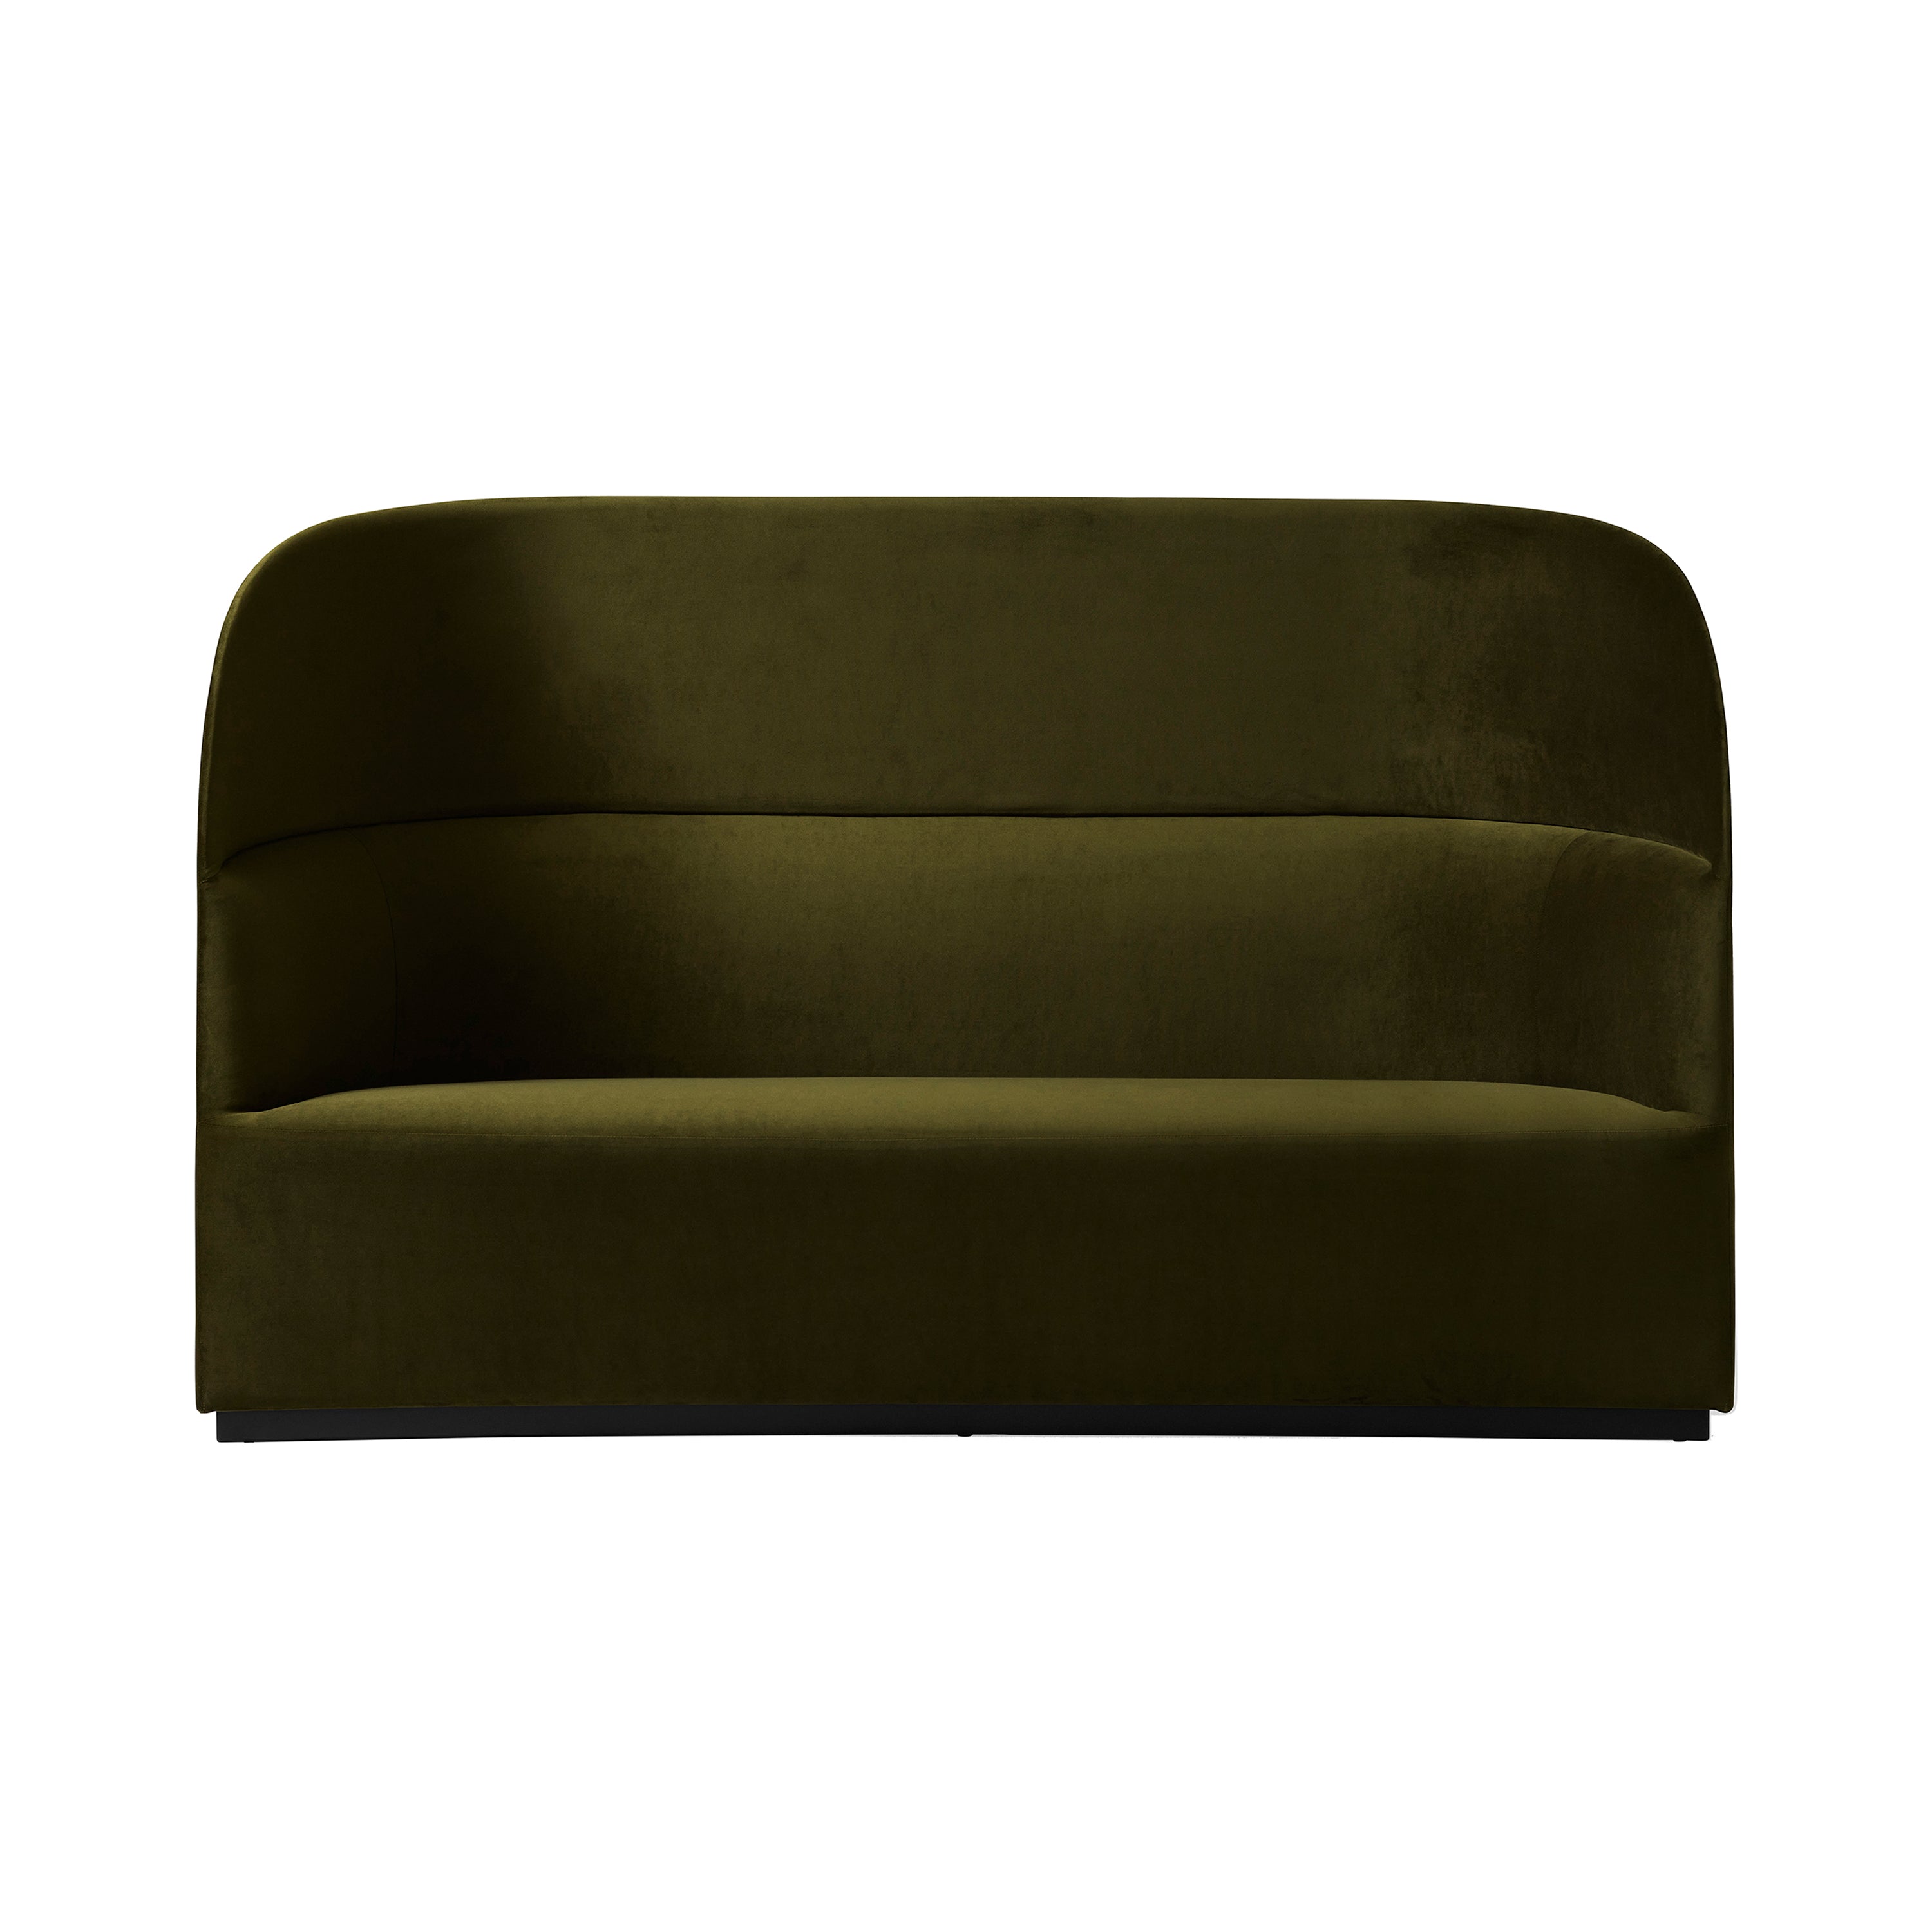 Tearoom Highback Sofa: With Power Outlet + Champion 035